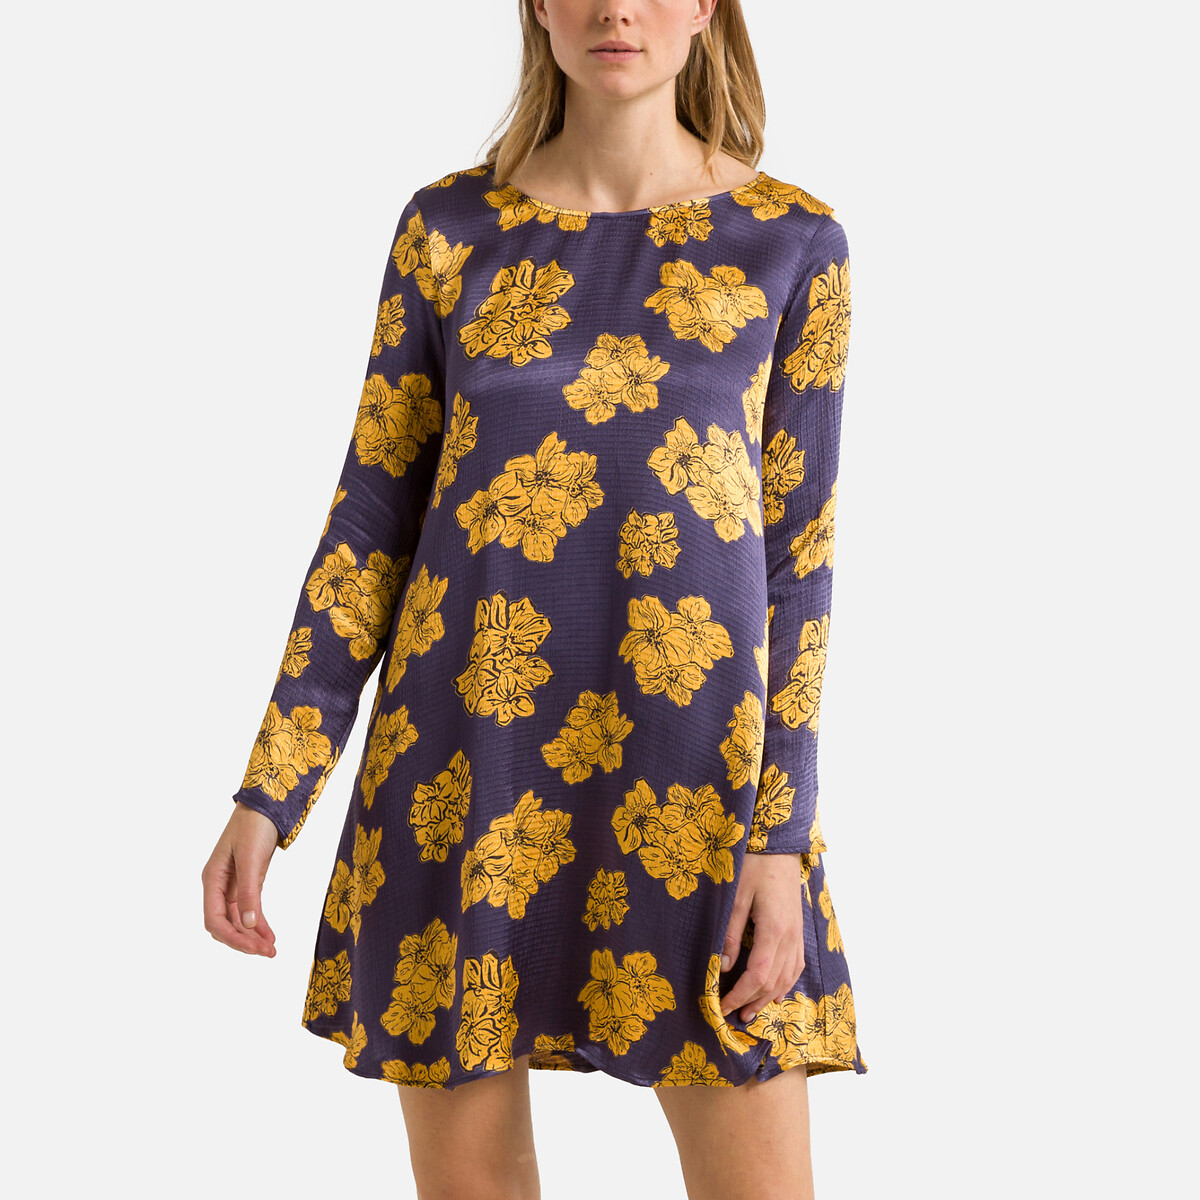 Shaning Printed Mini Dress with Long Sleeves